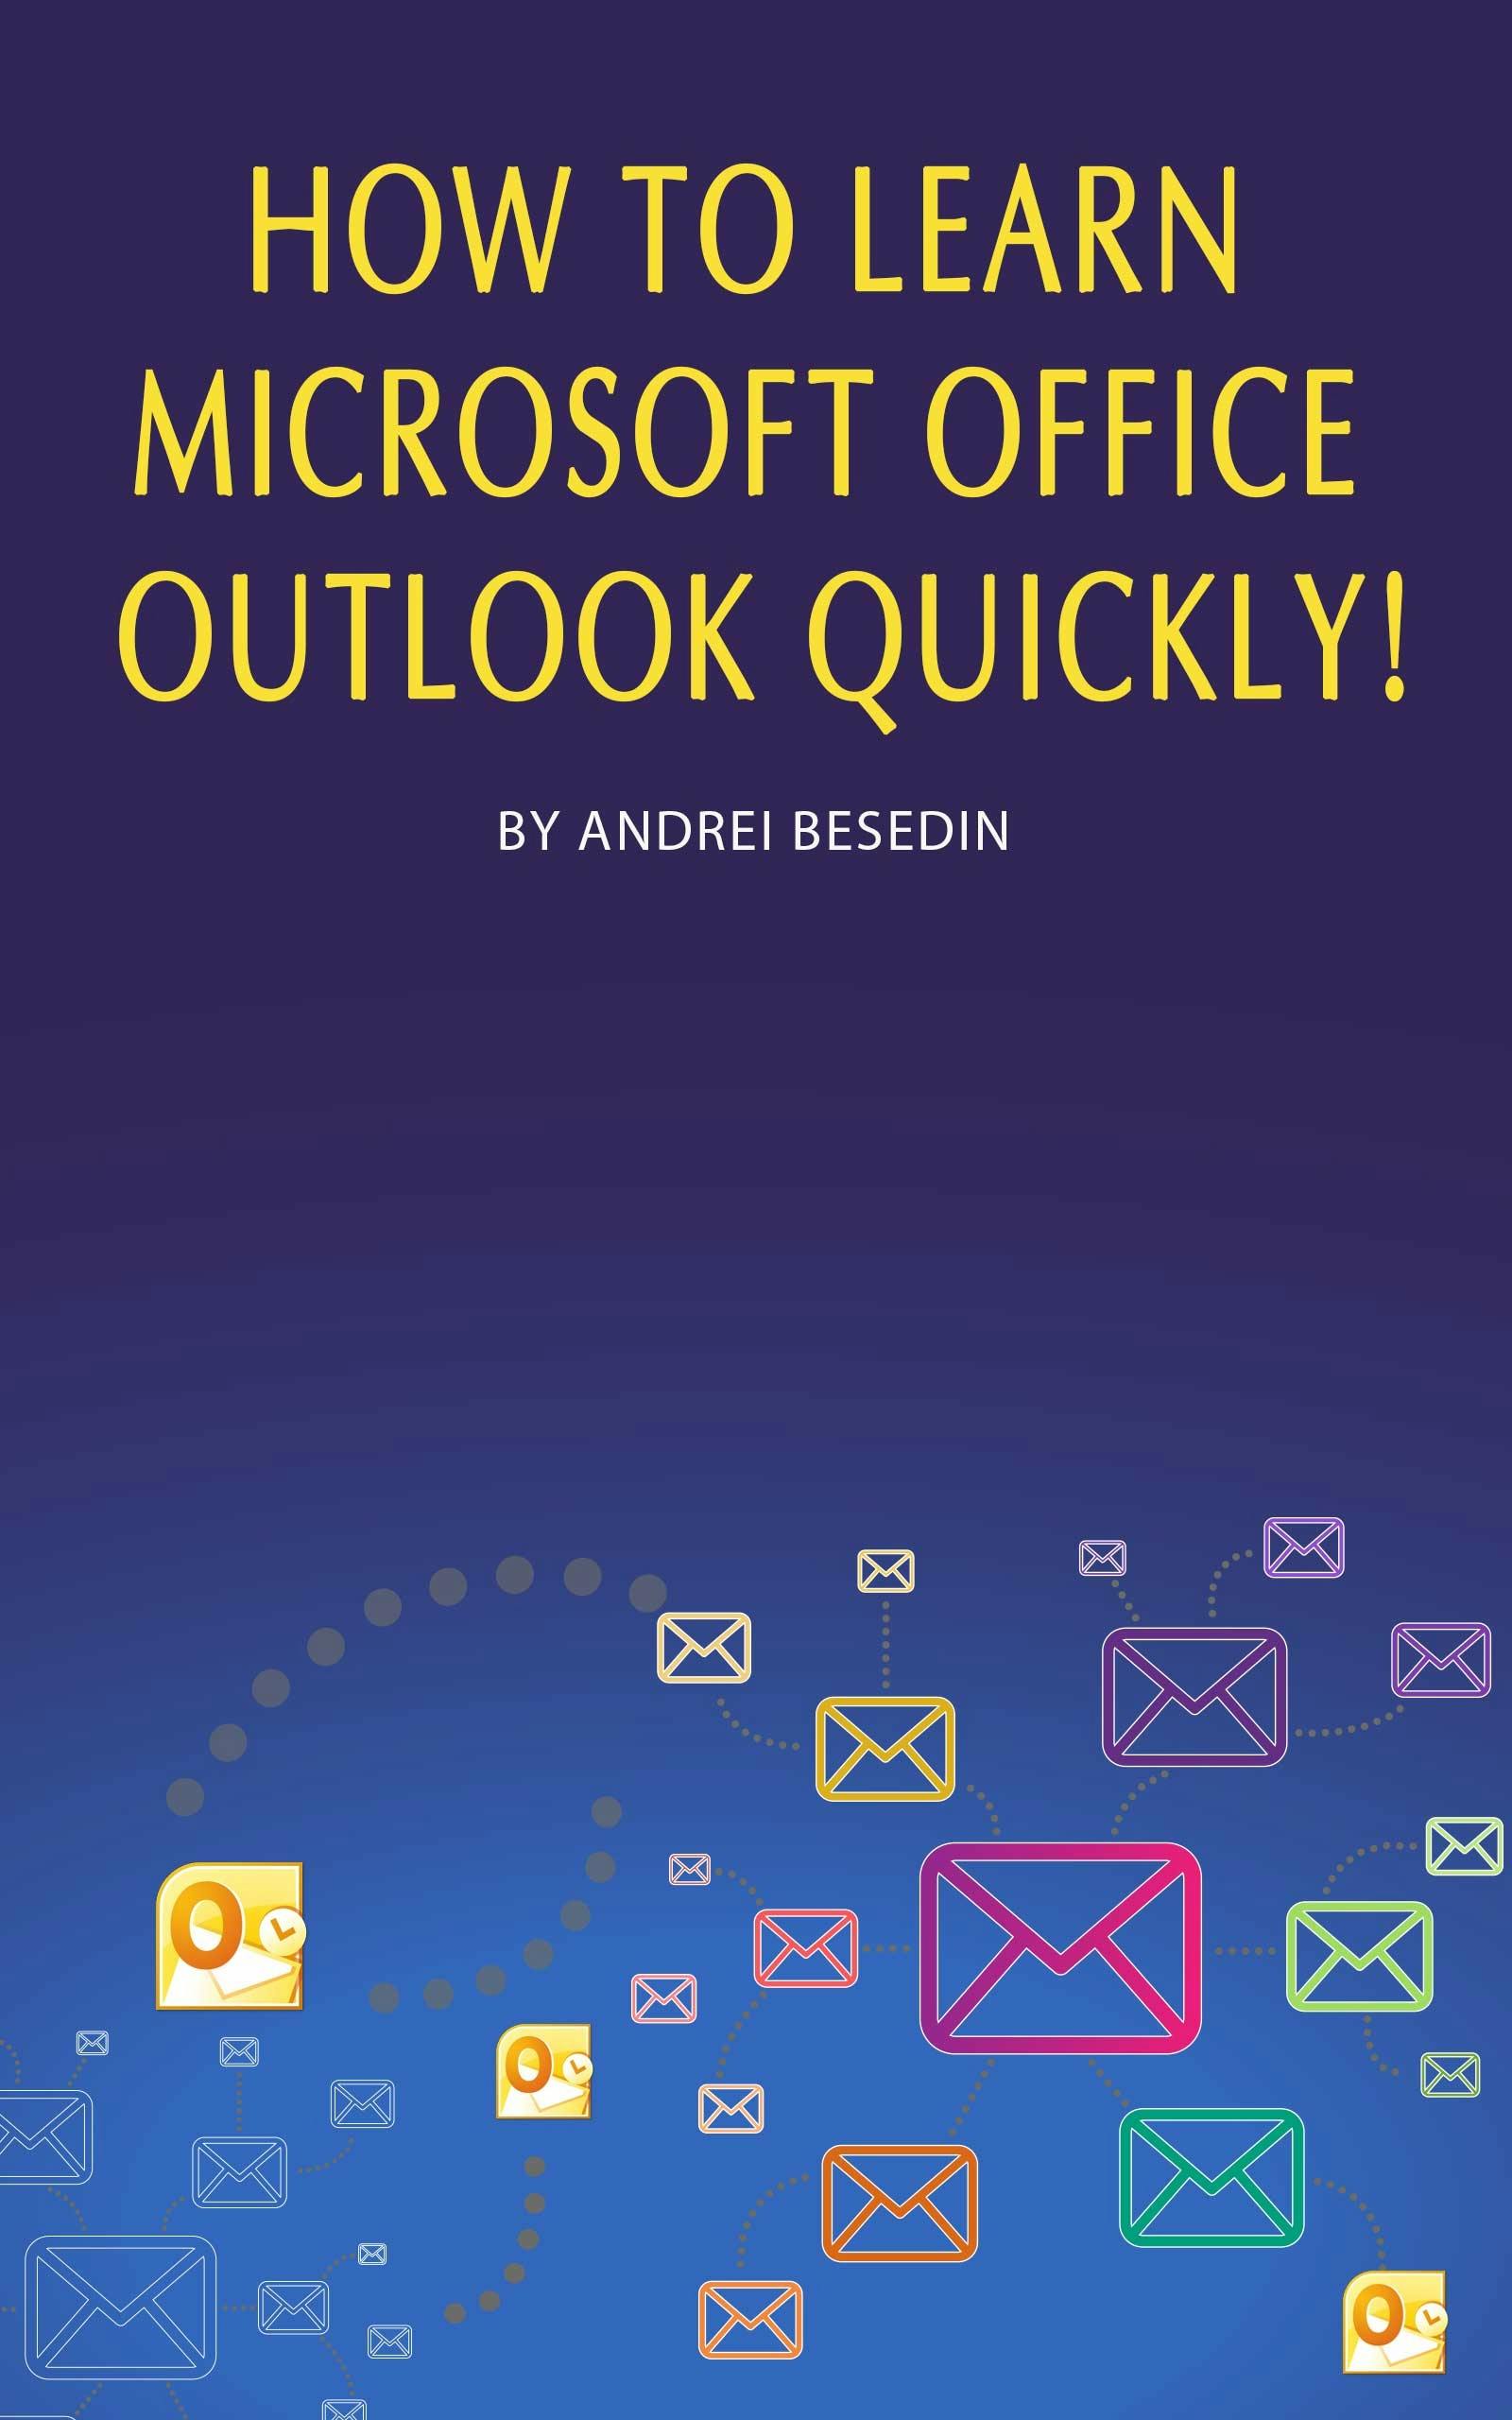 How to Learn Microsoft Office Outlook Quickly! - Andrei Besedin